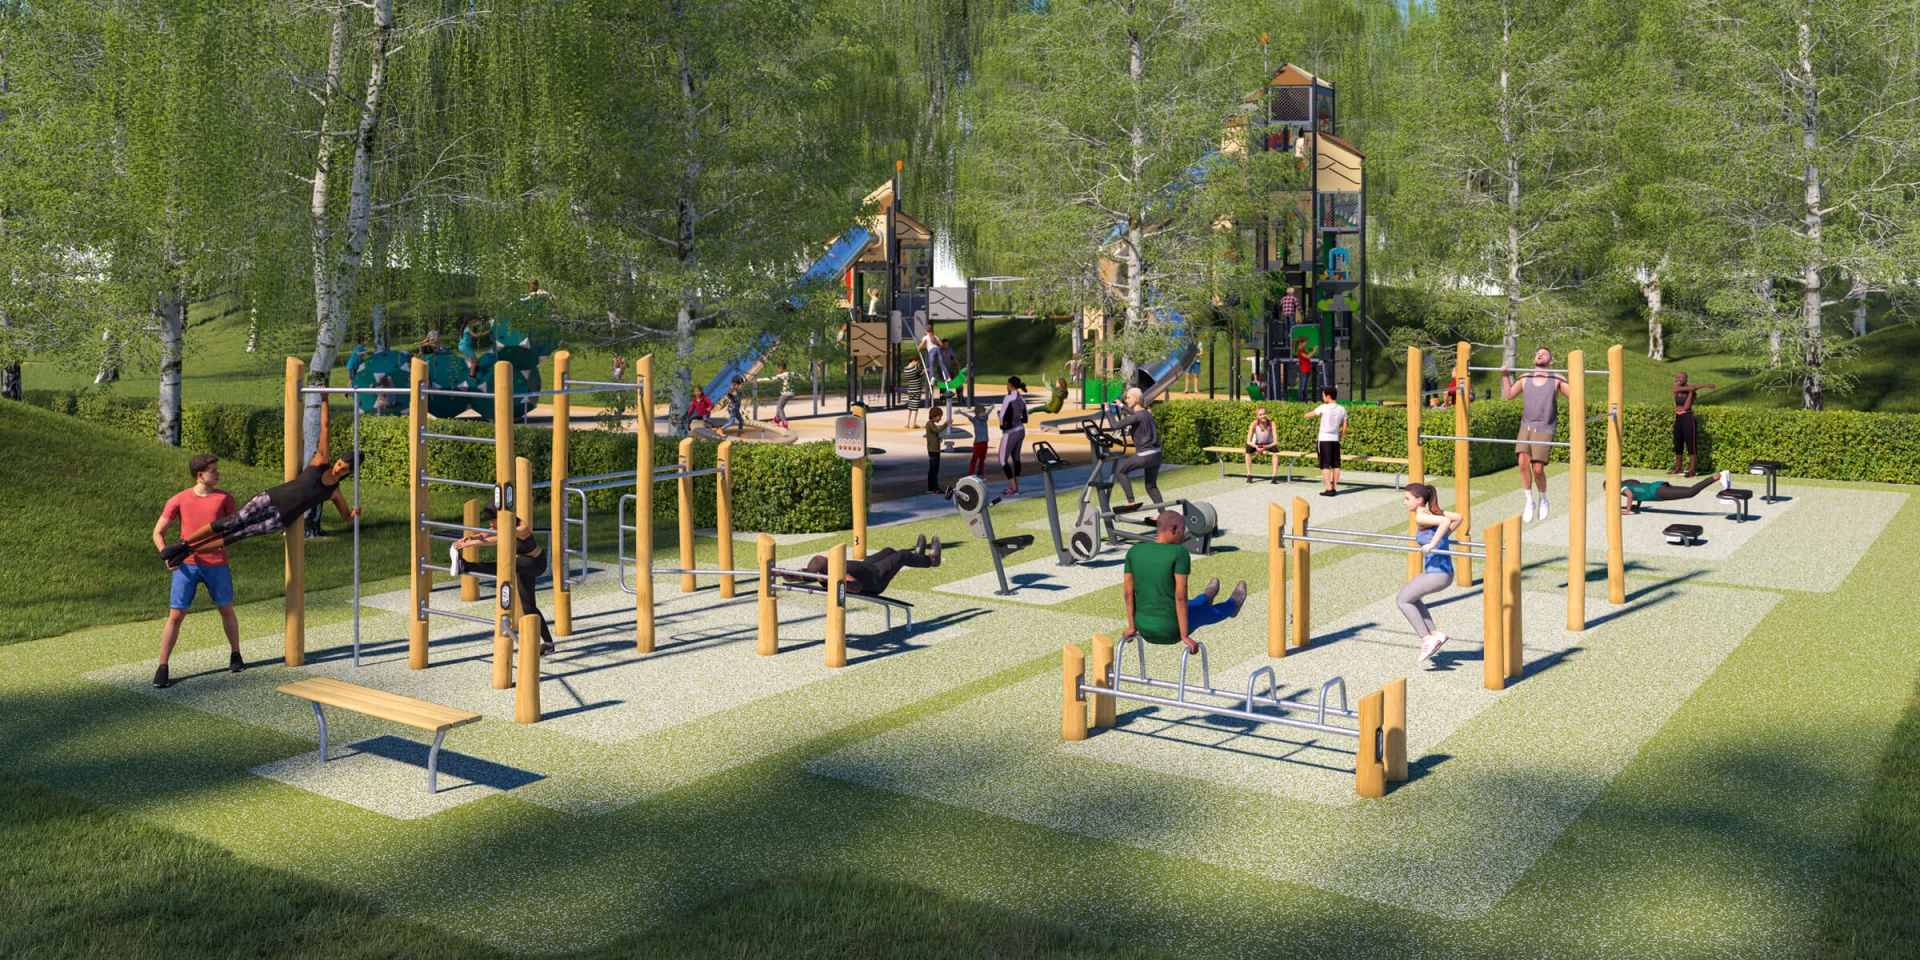 Design idea for a wooden outdoor gym with a playground for children